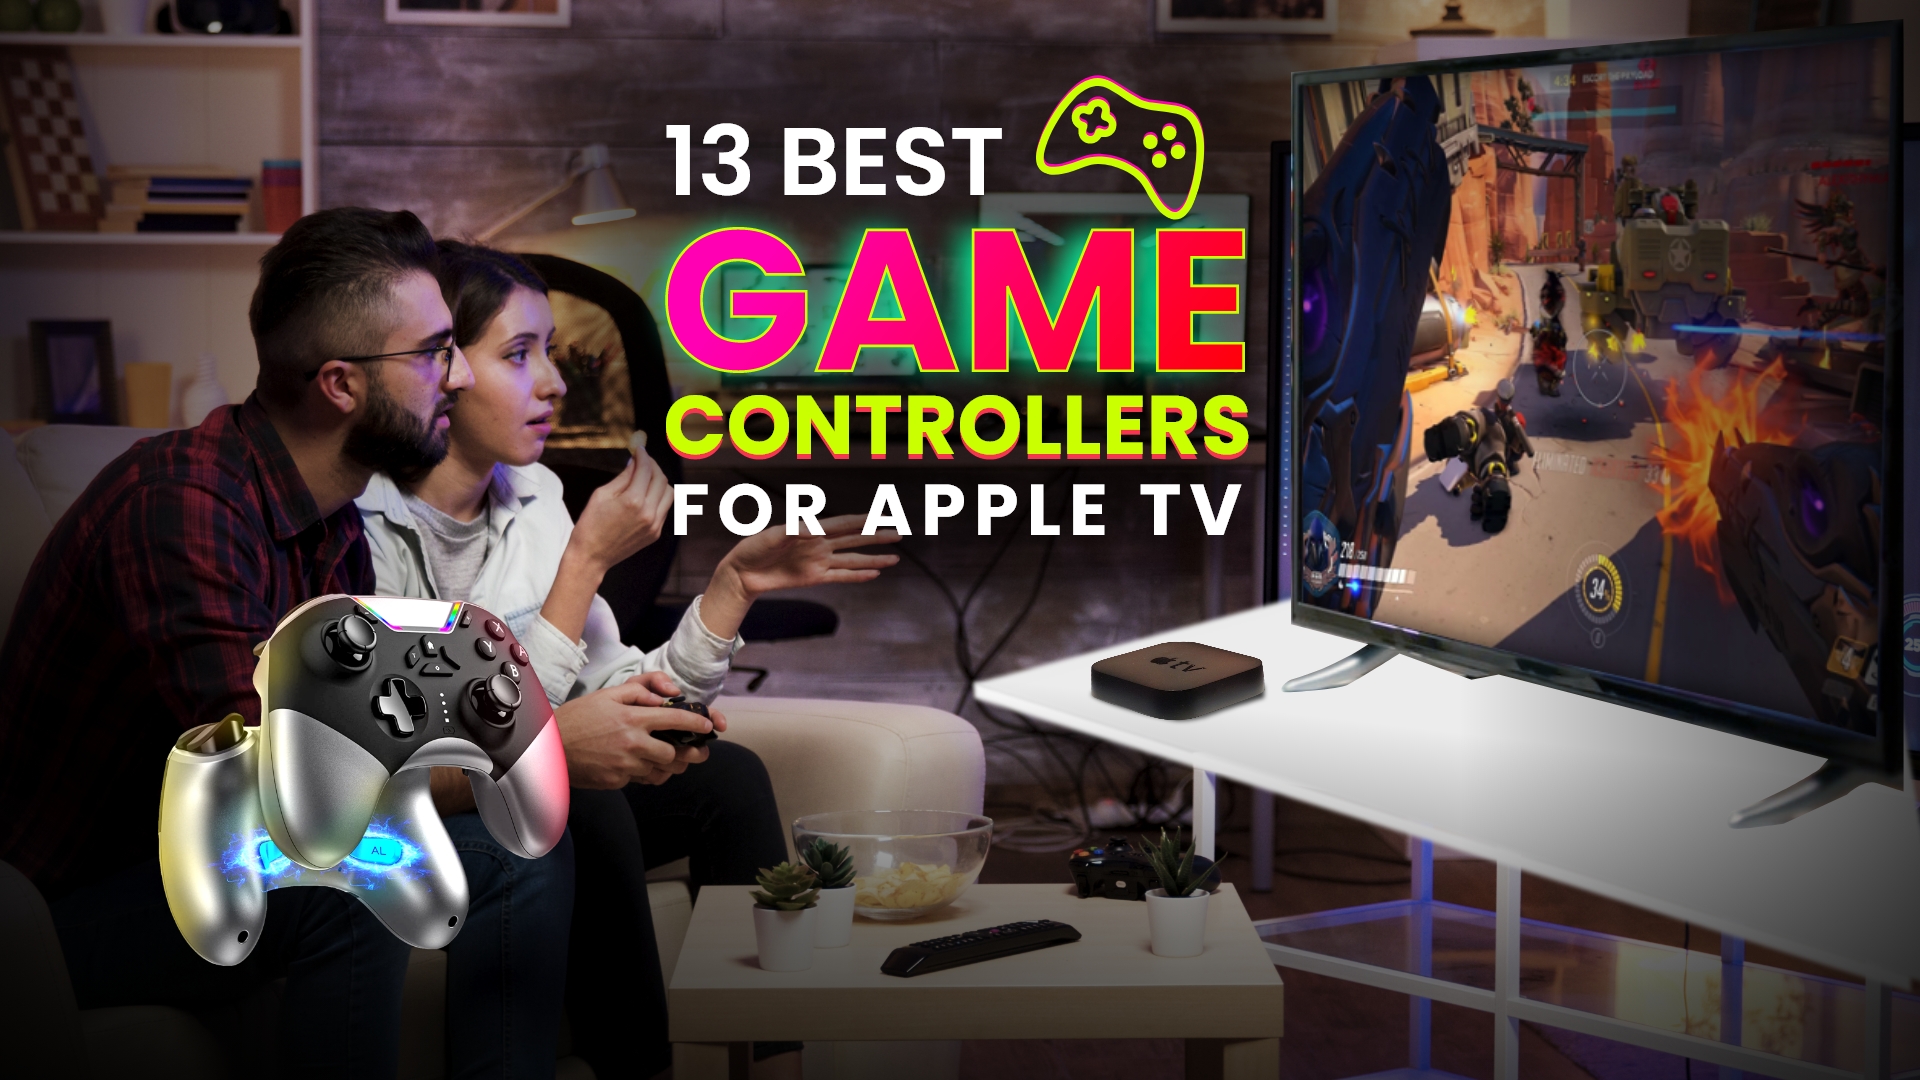 10 Best Game Controllers for Apple TV